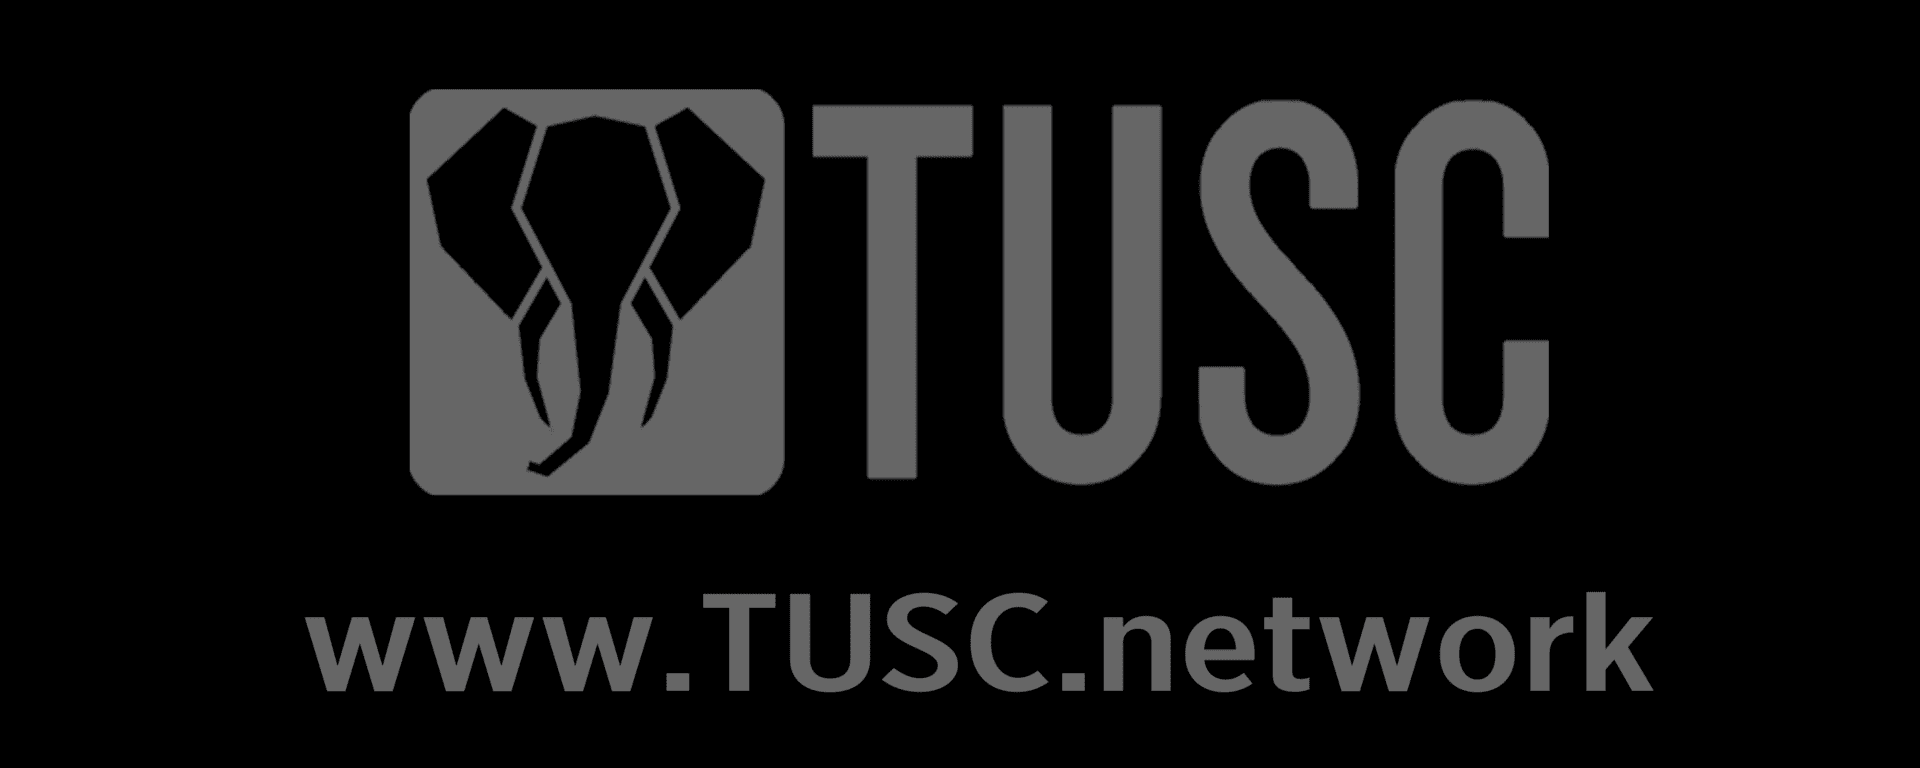 TUSC cryptocurrency 